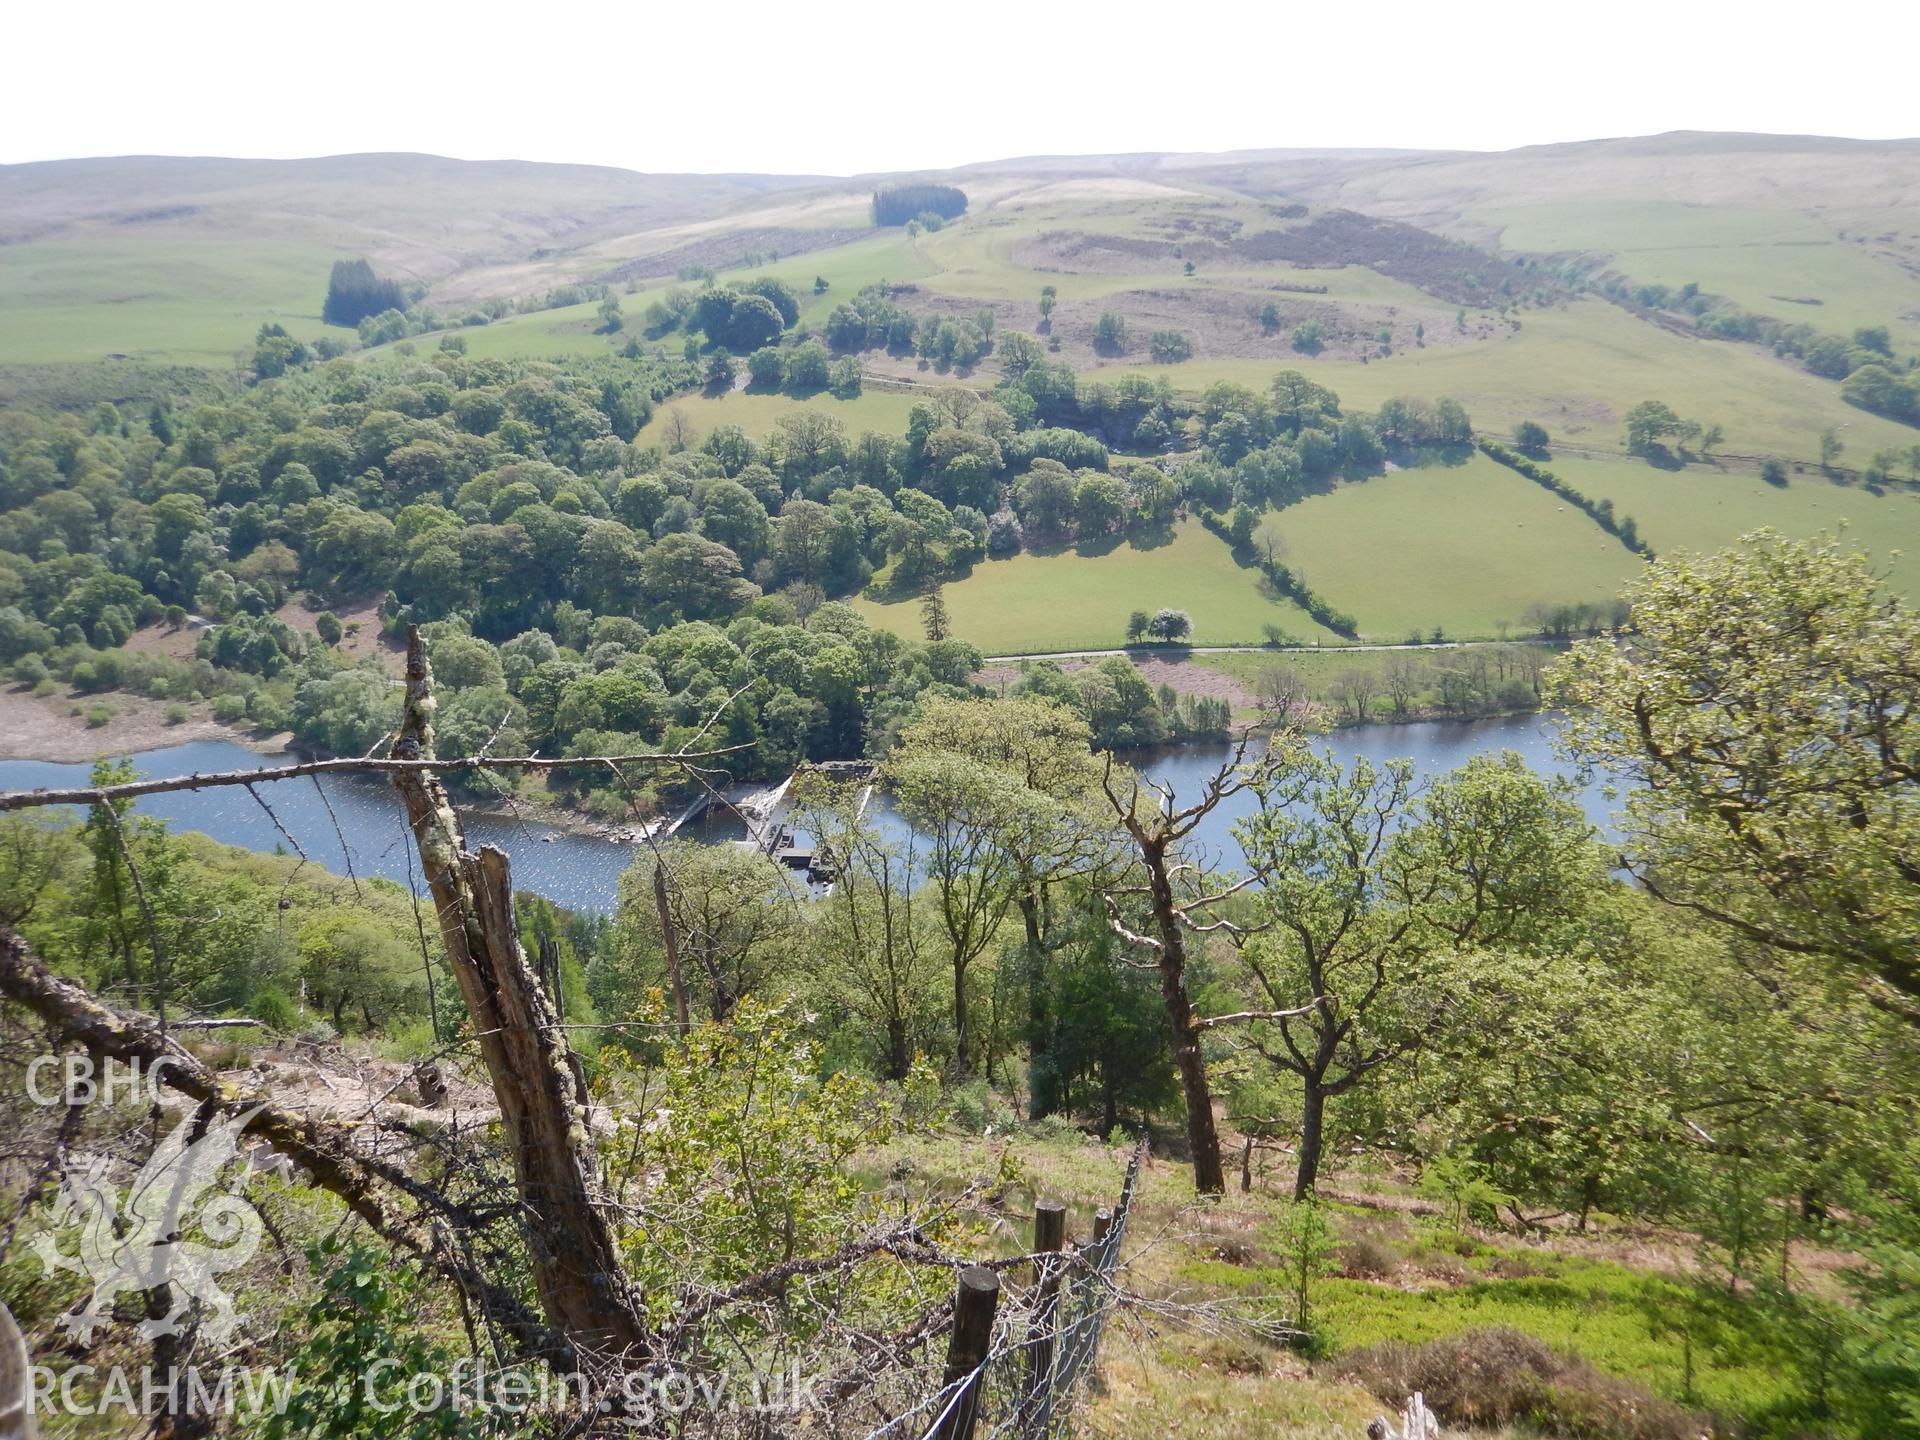 View of the Dolymynach Dam from the proposed cable route, looking south-east. Photographed as part of Archaeological Desk Based Assessment of Afon Claerwen, Elan Valley, Rhayader, Powys. Assessment conducted by Archaeology Wales in 2018. Report no. 1681.